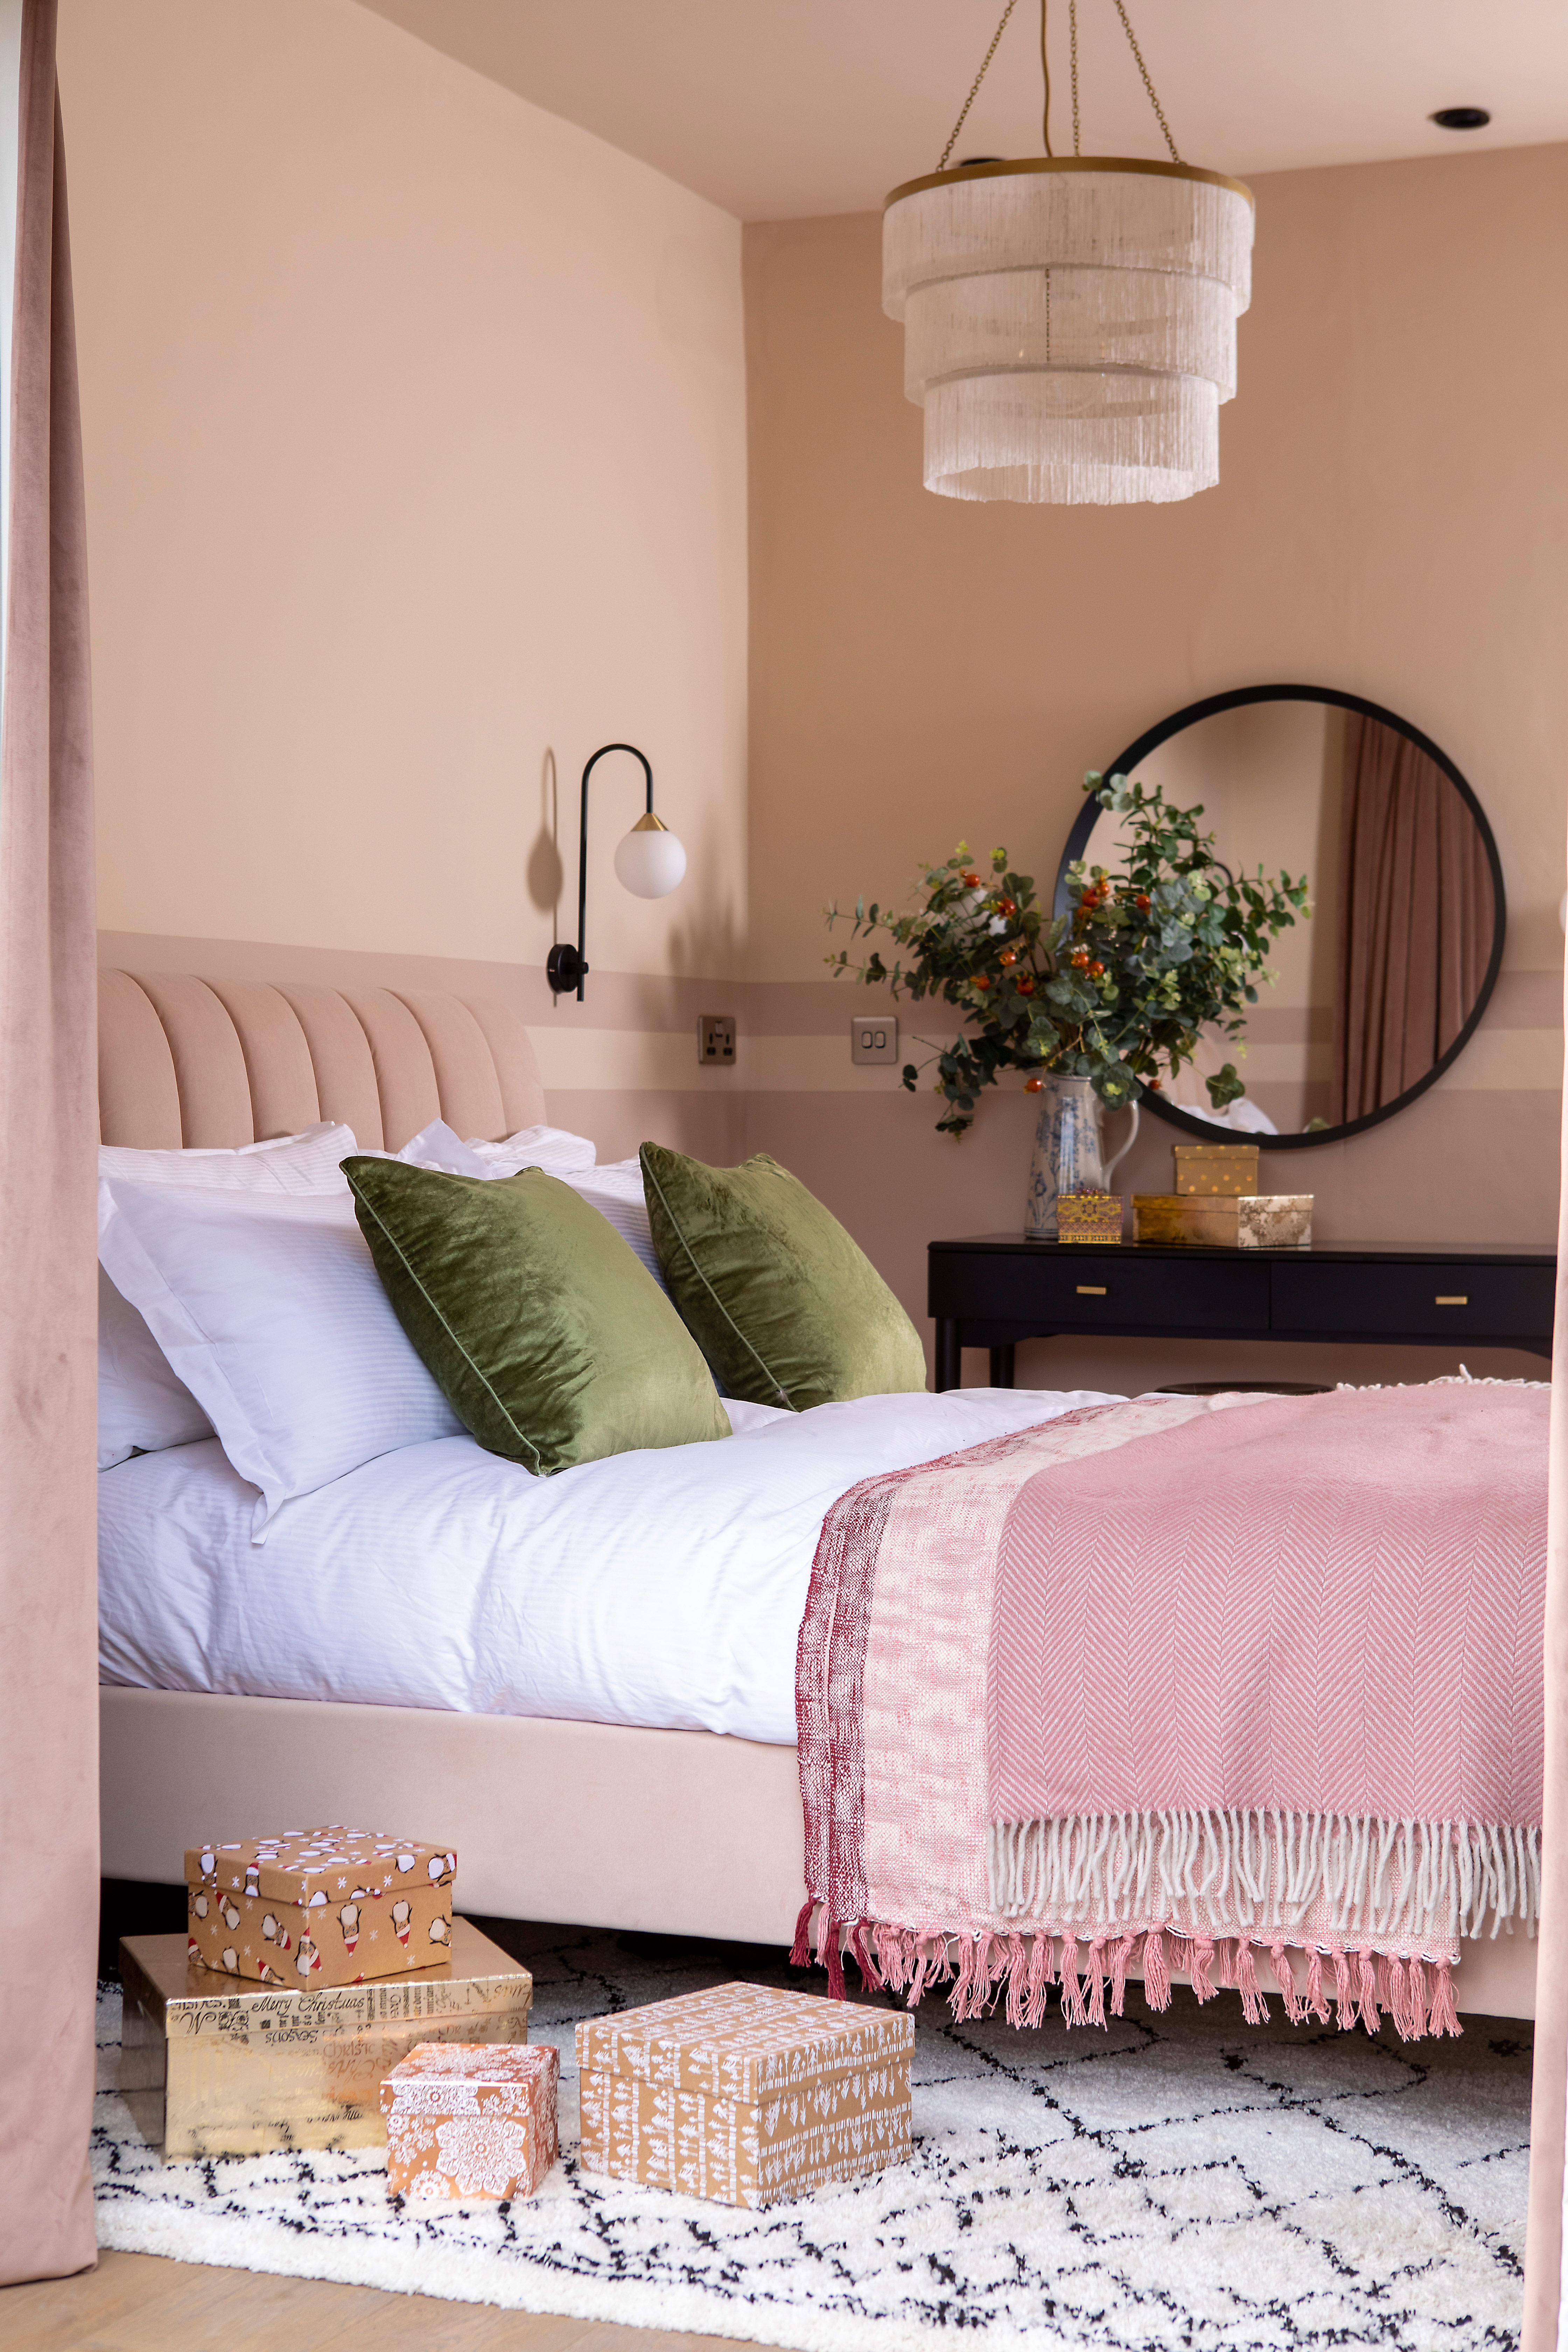 A bedroom with peach wall paint decor, with green cushions, black framed round mirror and statement pendant ceiling light with fringed lampshade